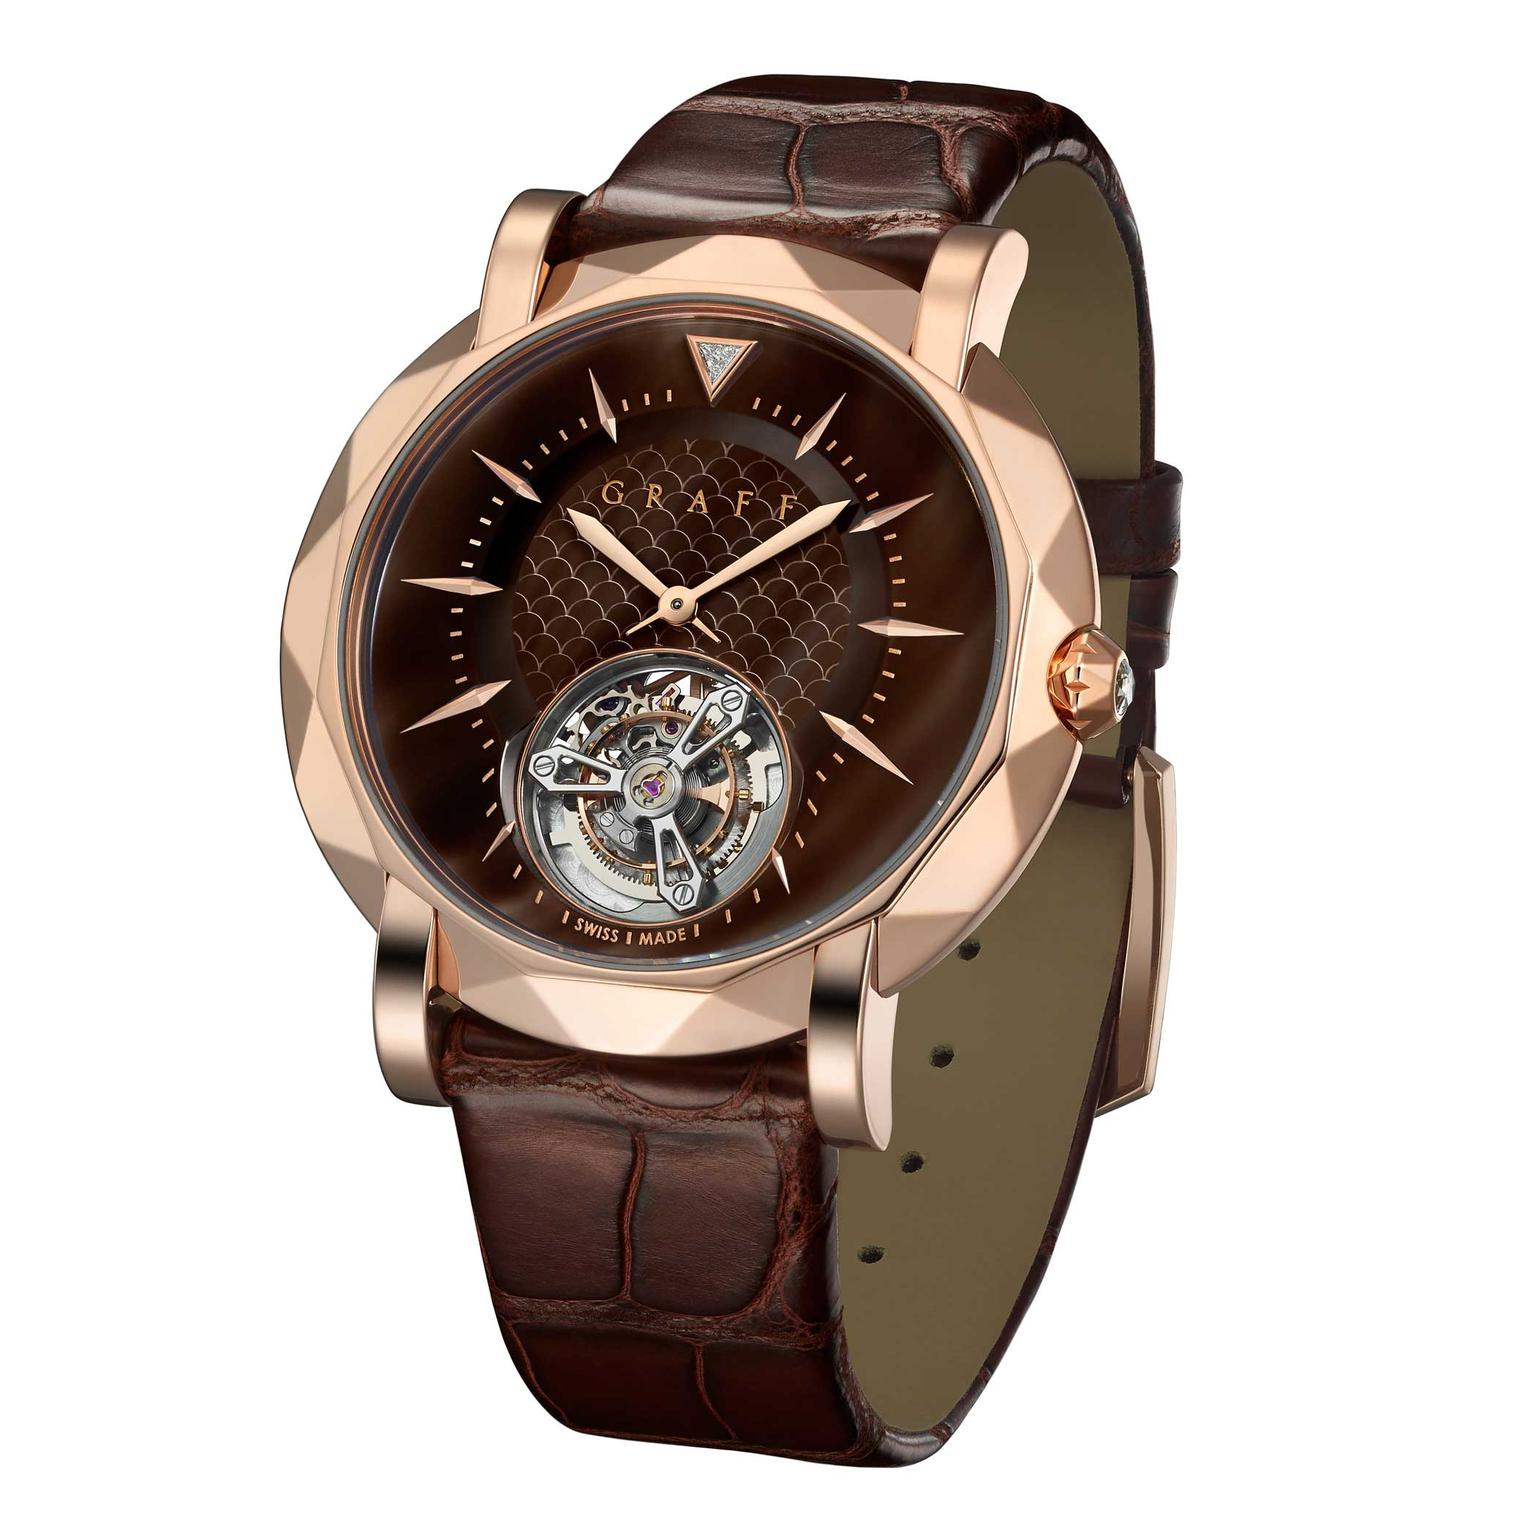 Graff Tourbillon with chocolate brown mother-of-pearl dial